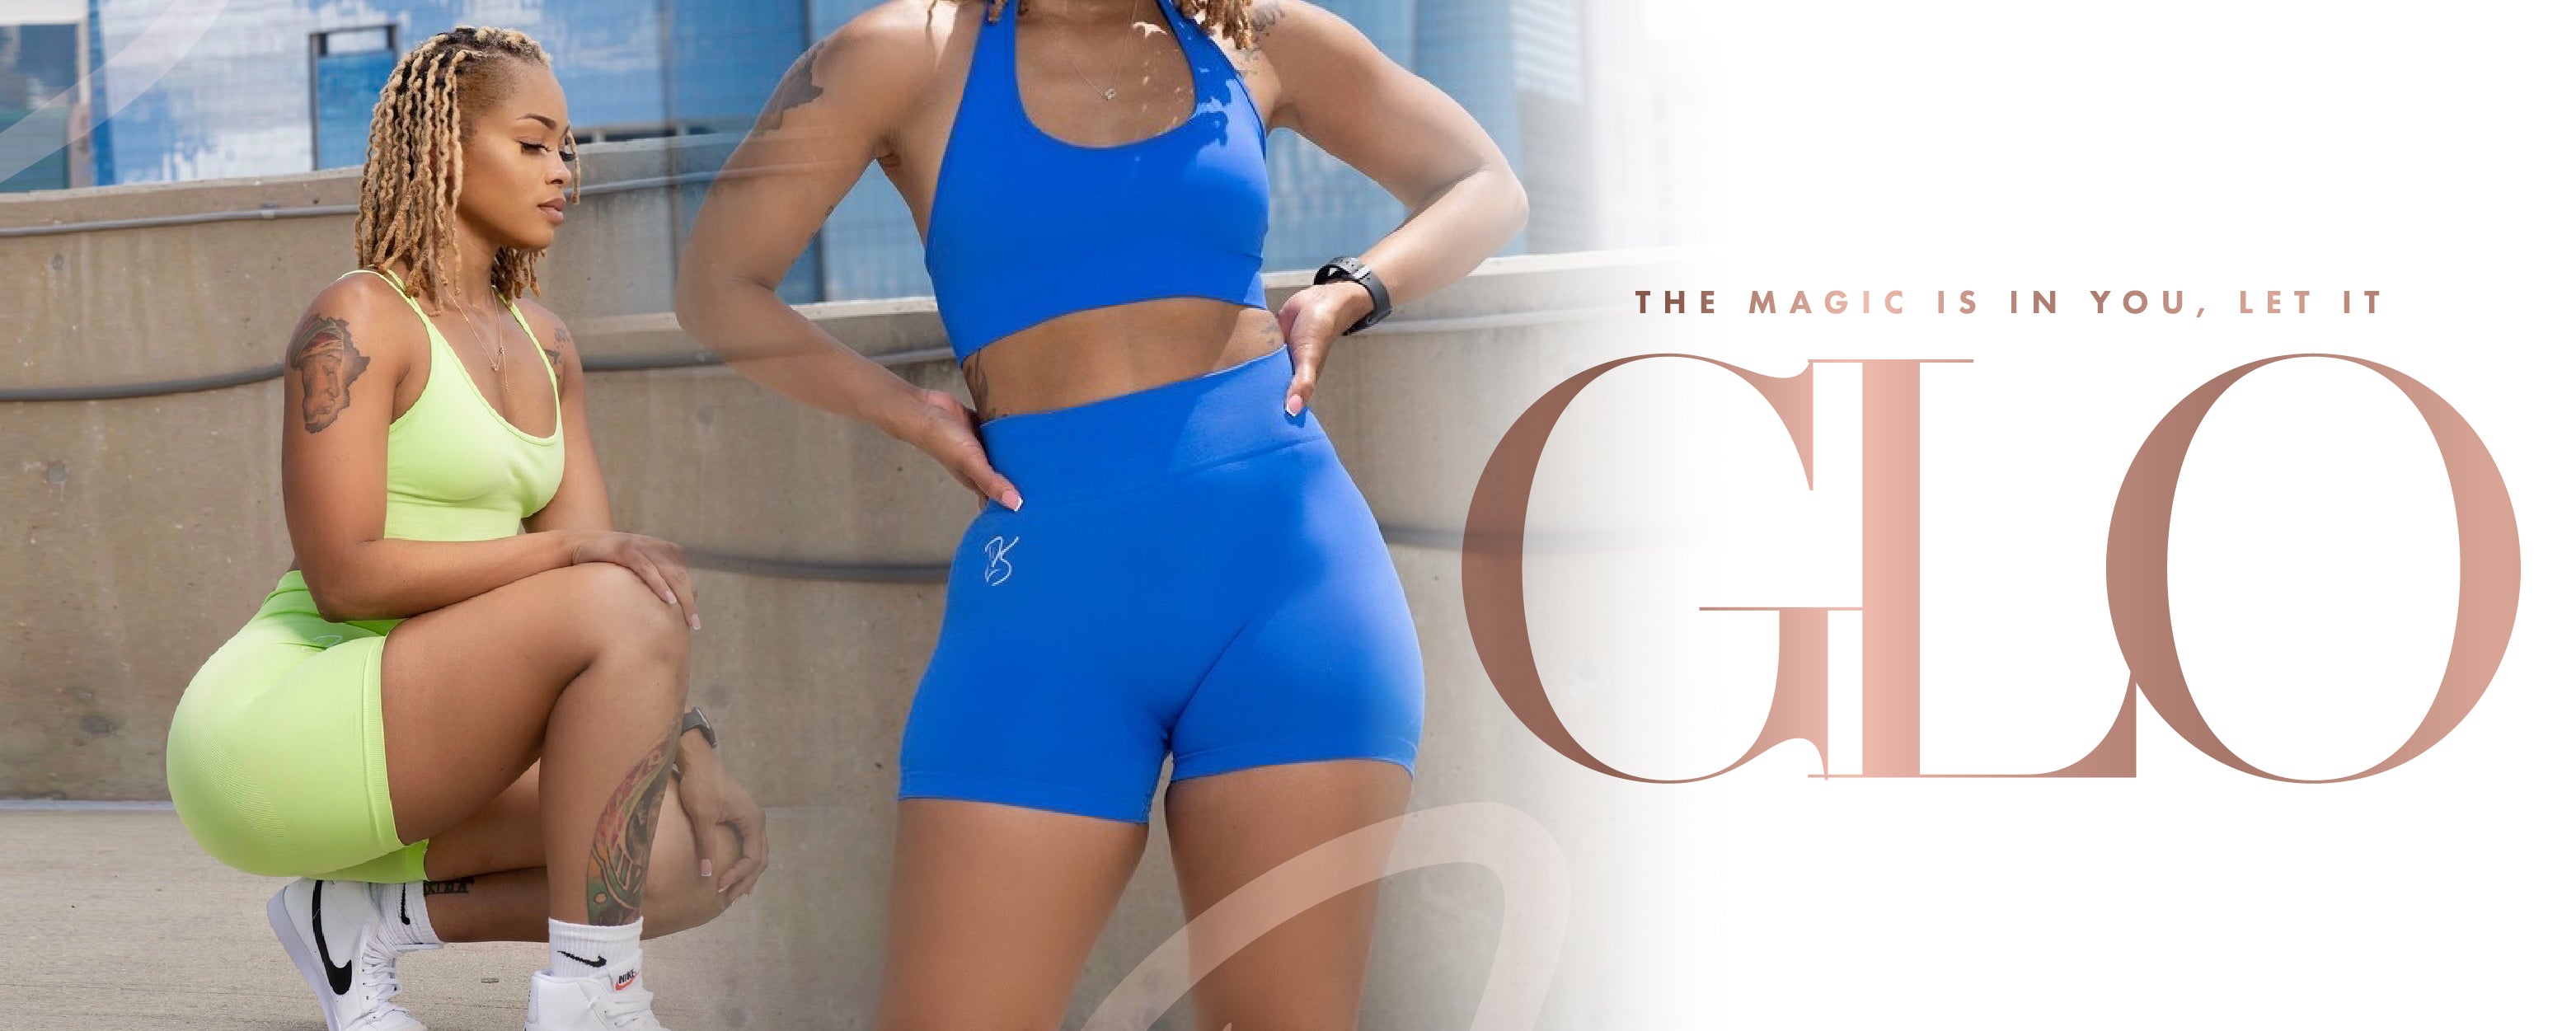 The Magic is in you, let it glo. This banner represents the new fitness apparel collection named "GLO"